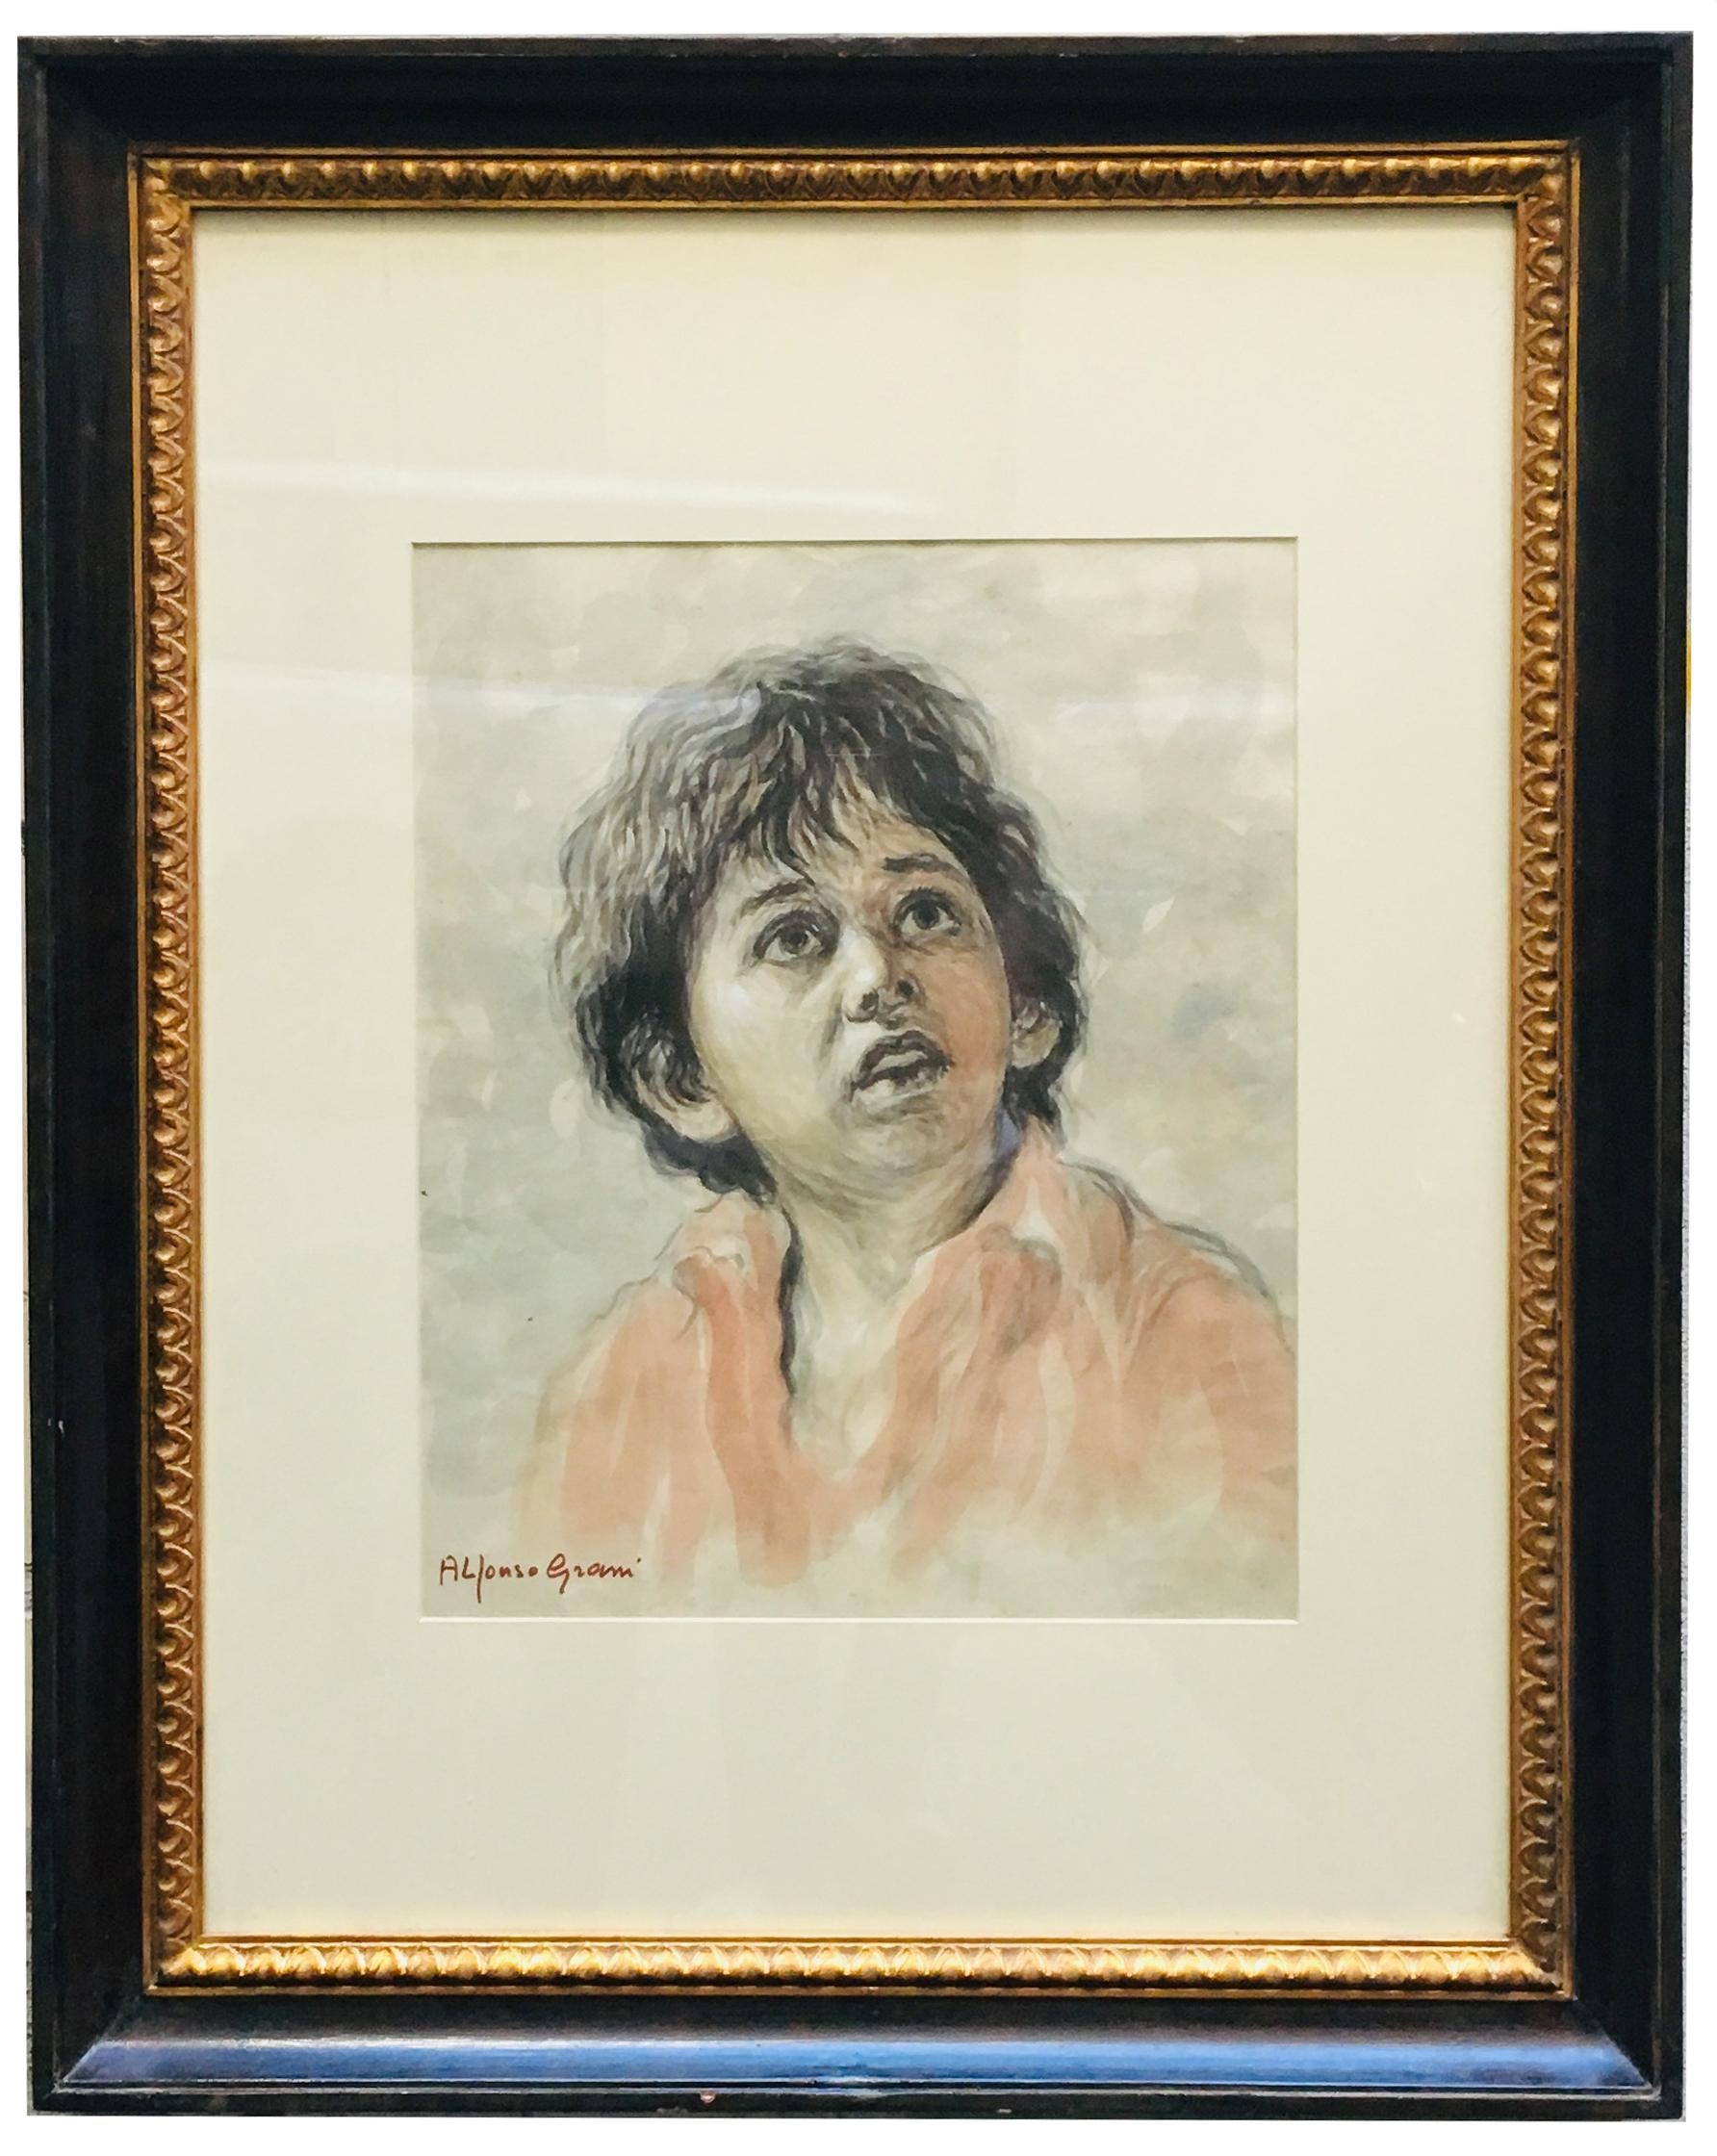 CHILD - Alfonso Grassi Watercolor on paper  Portrait italian Painting